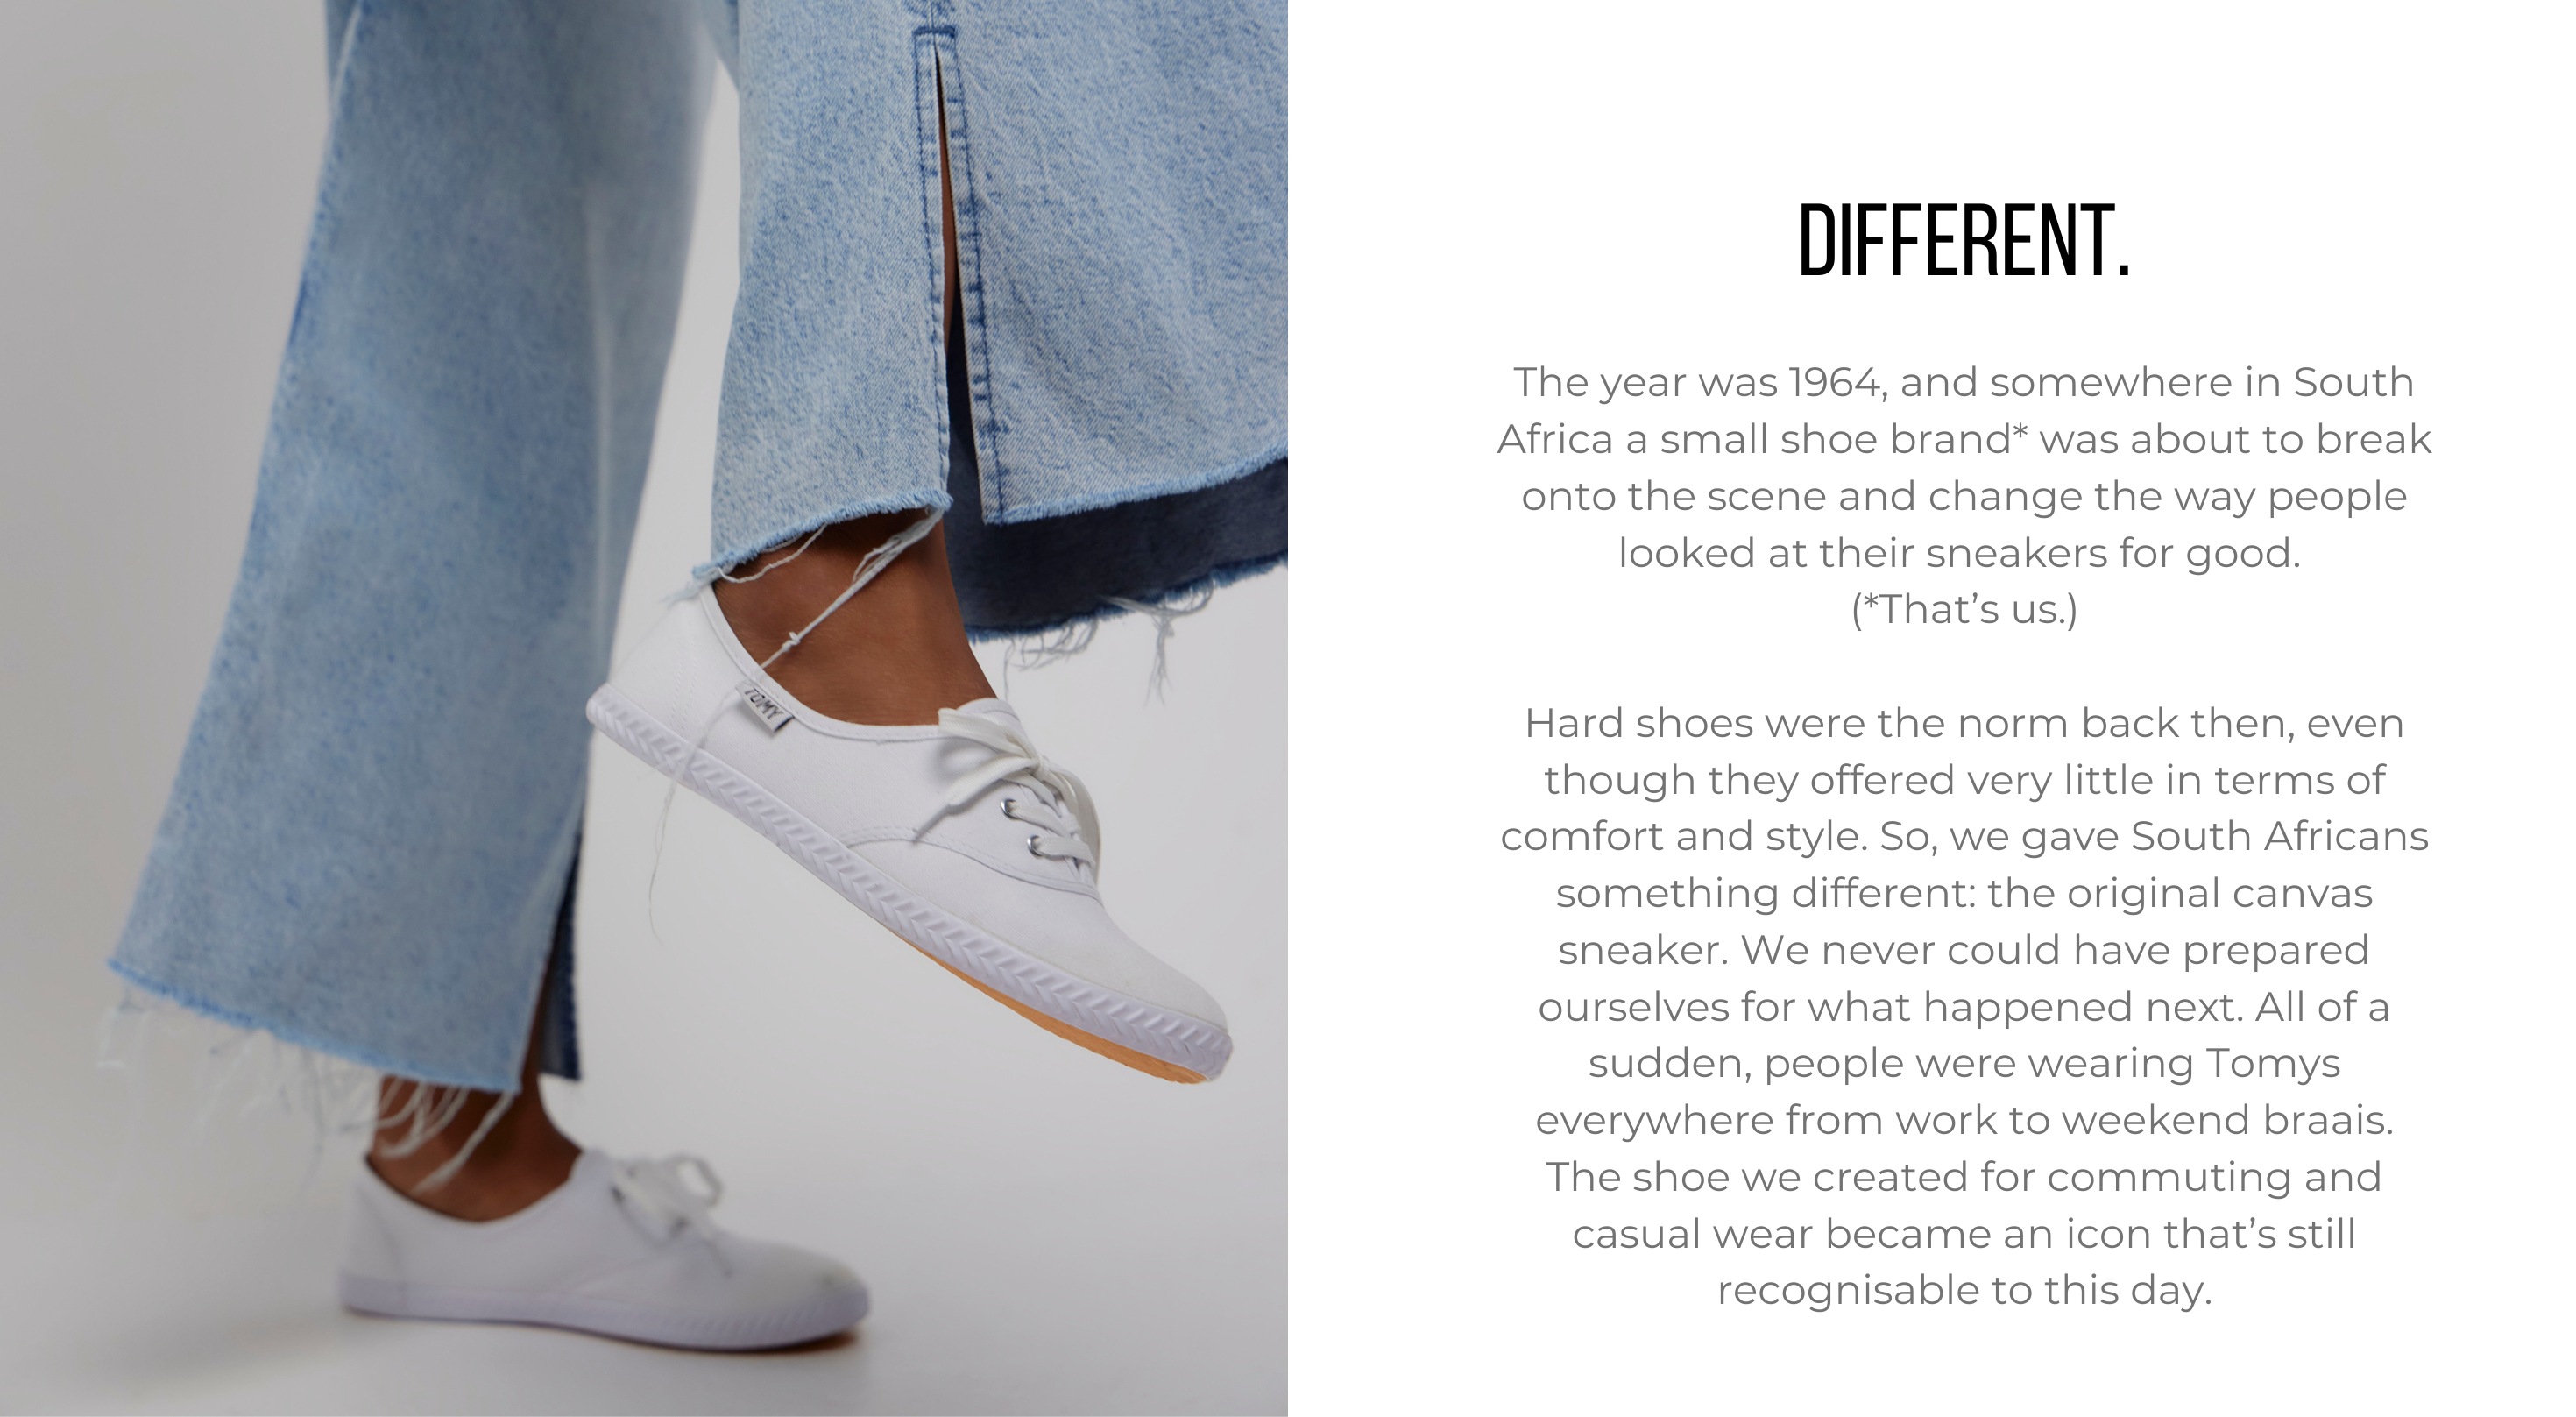 The year was 1964, and somewhere in South Africa a small shoe brand* was about to break onto the scene and change the way people looked at their sneakers for good. (*That’s us.) Hard shoes were the norm back then, even though they offered very little in terms of comfort and style. So, we gave South Africans something different: the original canvas sneaker. We never could have prepared ourselves for what happened next. All of a sudden, people were wearing Tomys everywhere from work to weekend braais. The shoe we created for commuting and casual wear became an icon that’s still recognisable to this day.